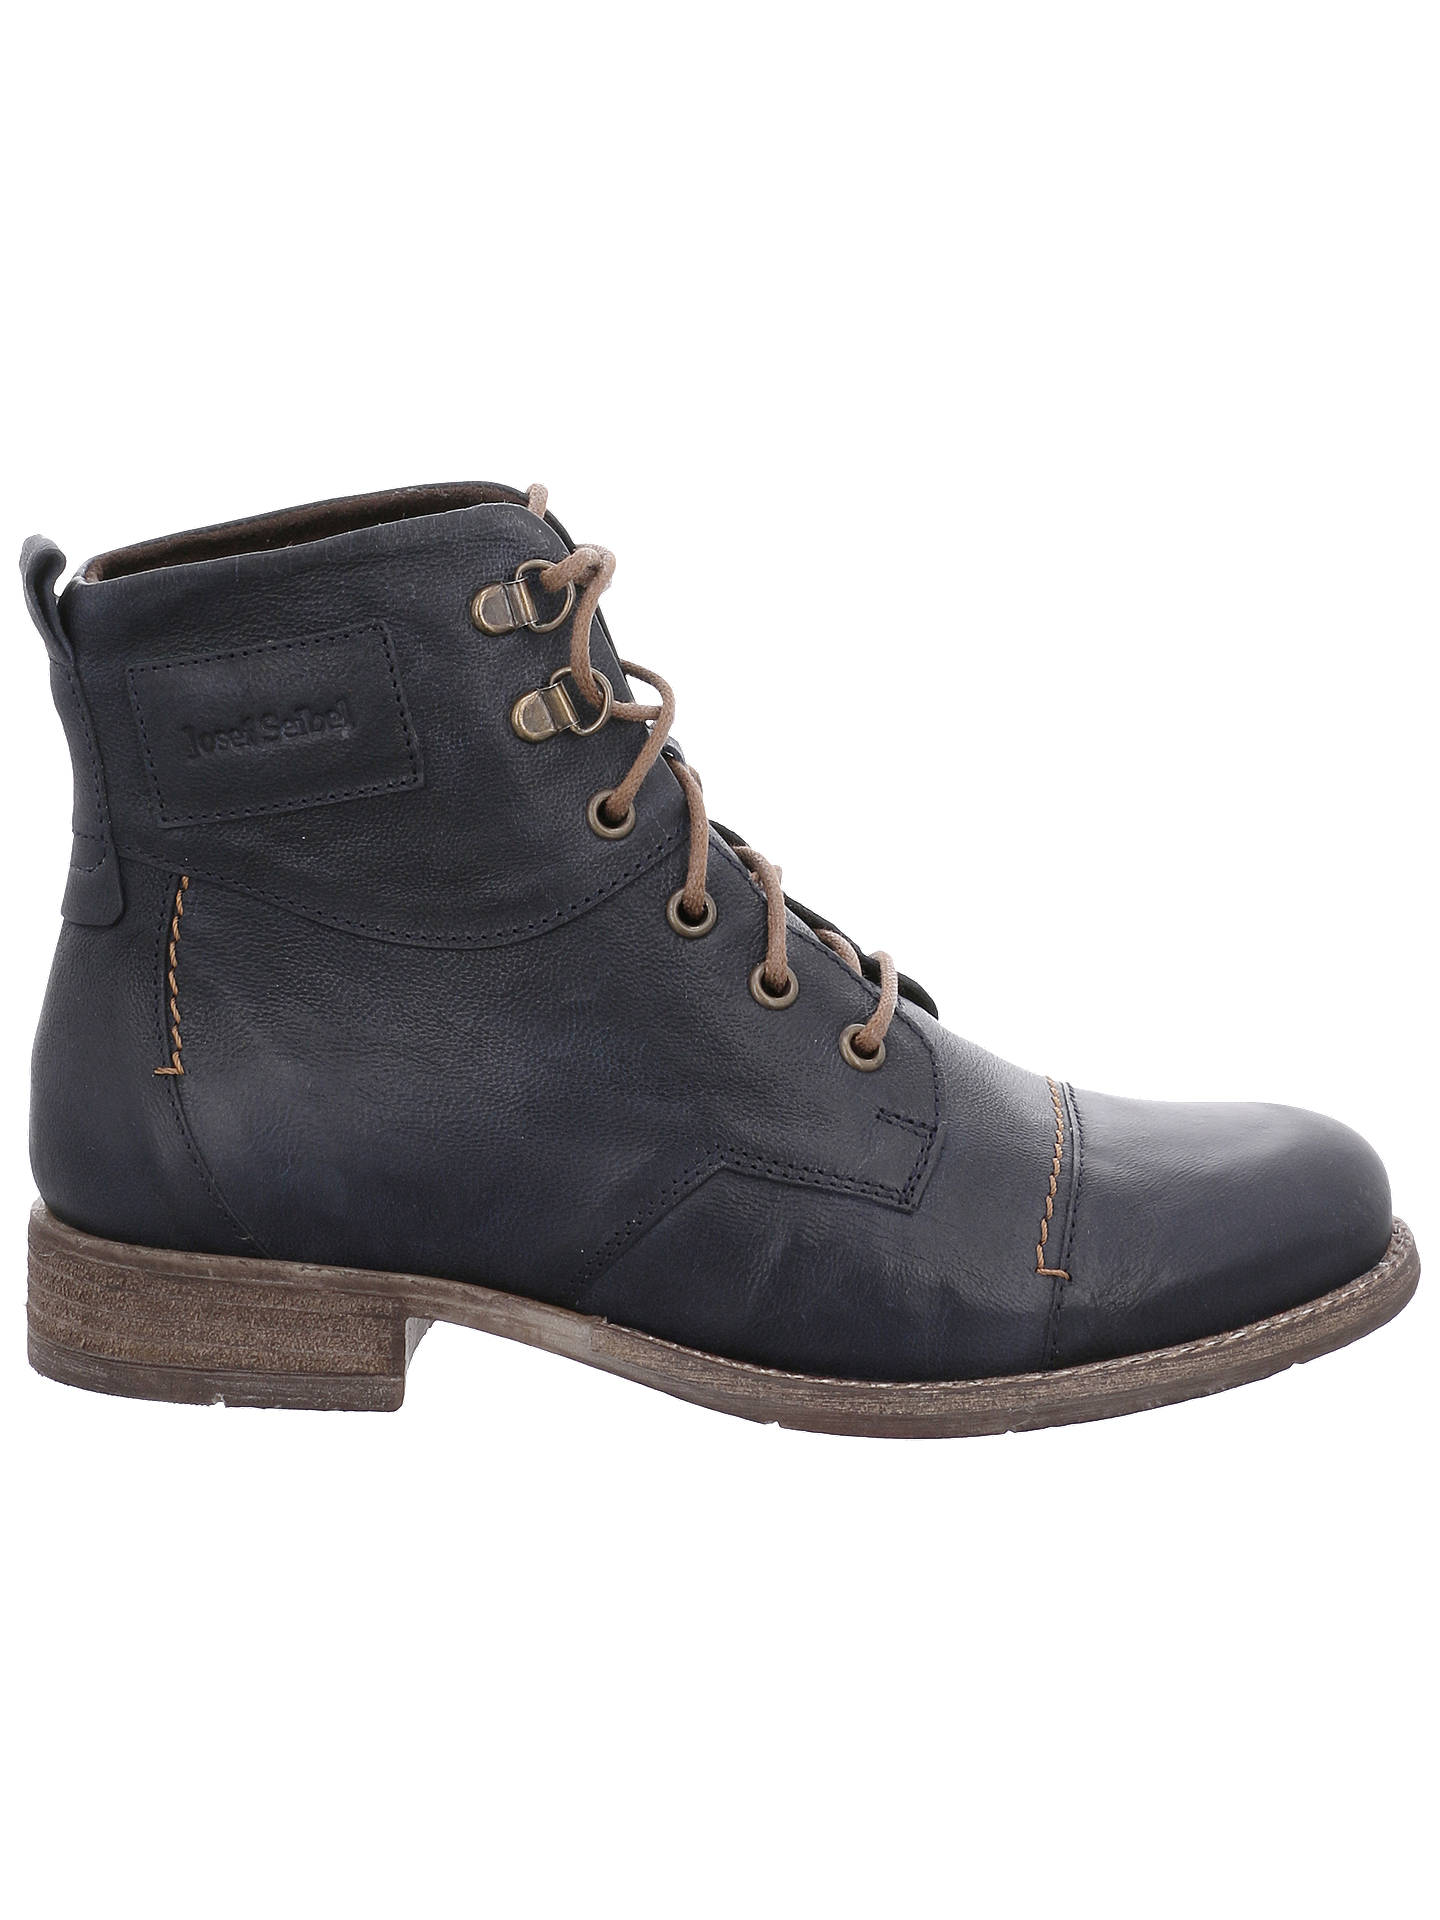 Josef Seibel Sienna 17 Lace Up Ankle Boots, Blue Leather at John Lewis ...